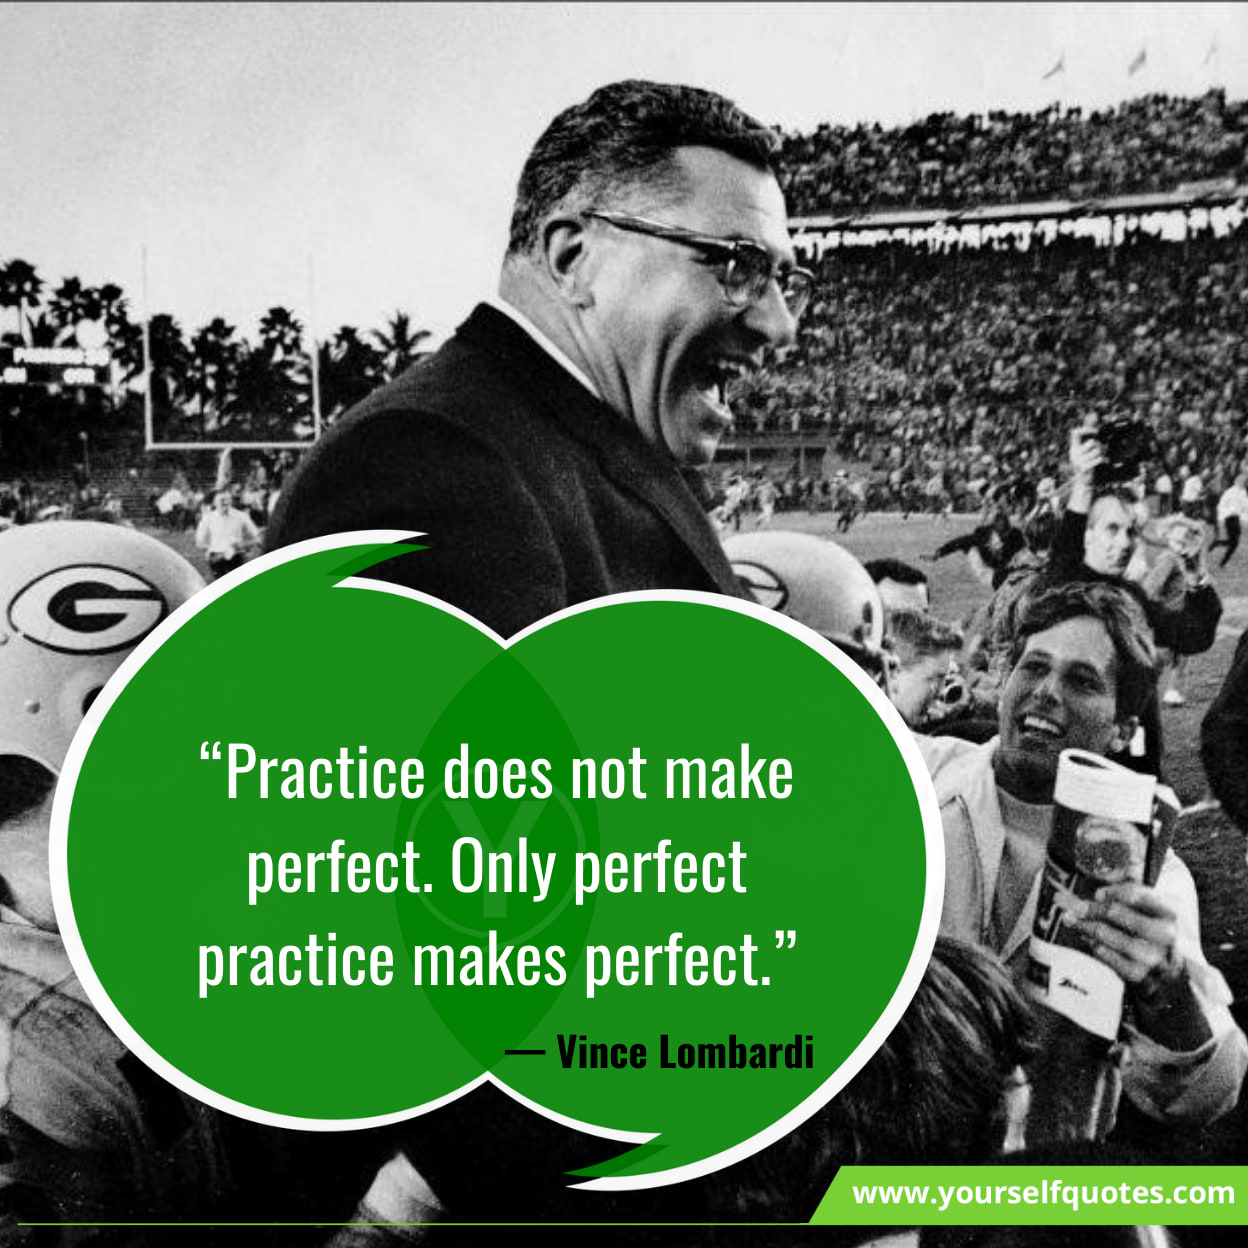 Vince Lombardi Quotes About Practice